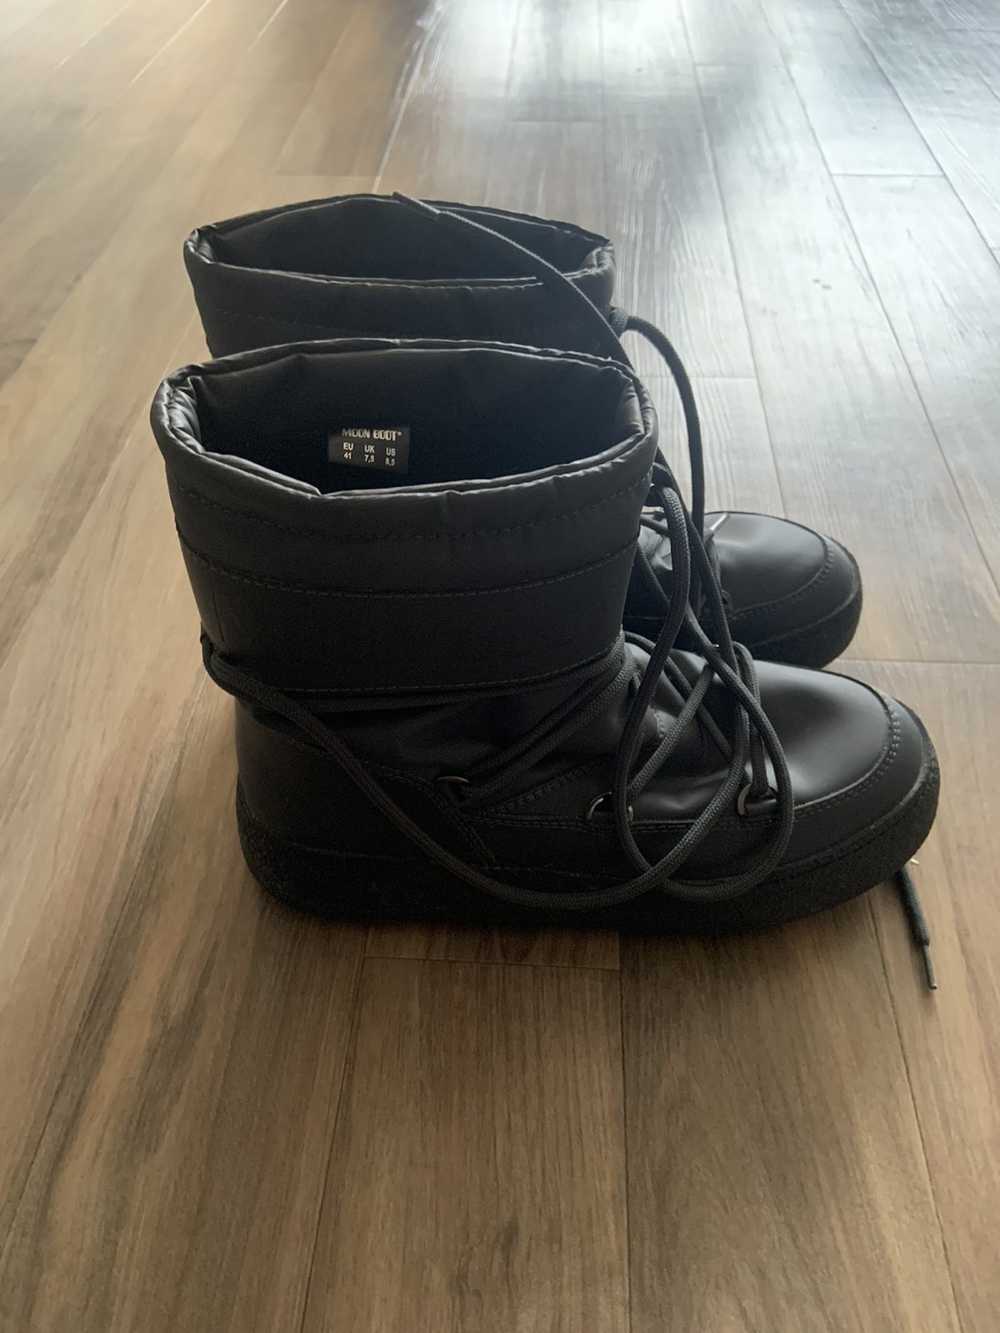 Moon Boot Moon Boots “Mtrack” men’s size 8.5 black - image 2